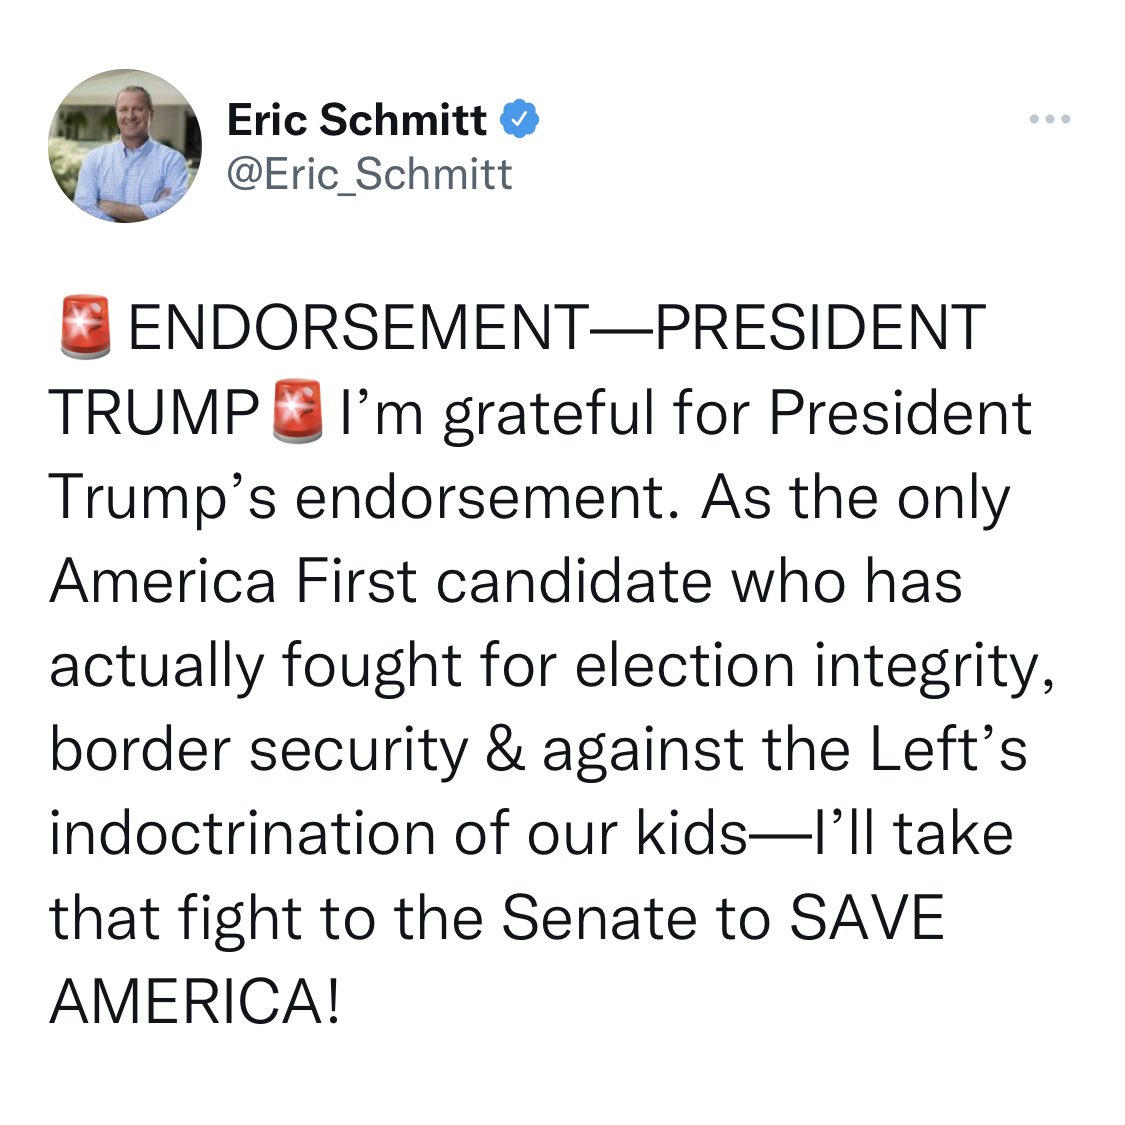 To recap, Trump couldn’t decide whether to endorse Eric Greitens or Eric Schmitt in the Missouri Senate race, so he just endorses “ERIC” the night before the election. Now both are graciously thanking him for his sincere support.